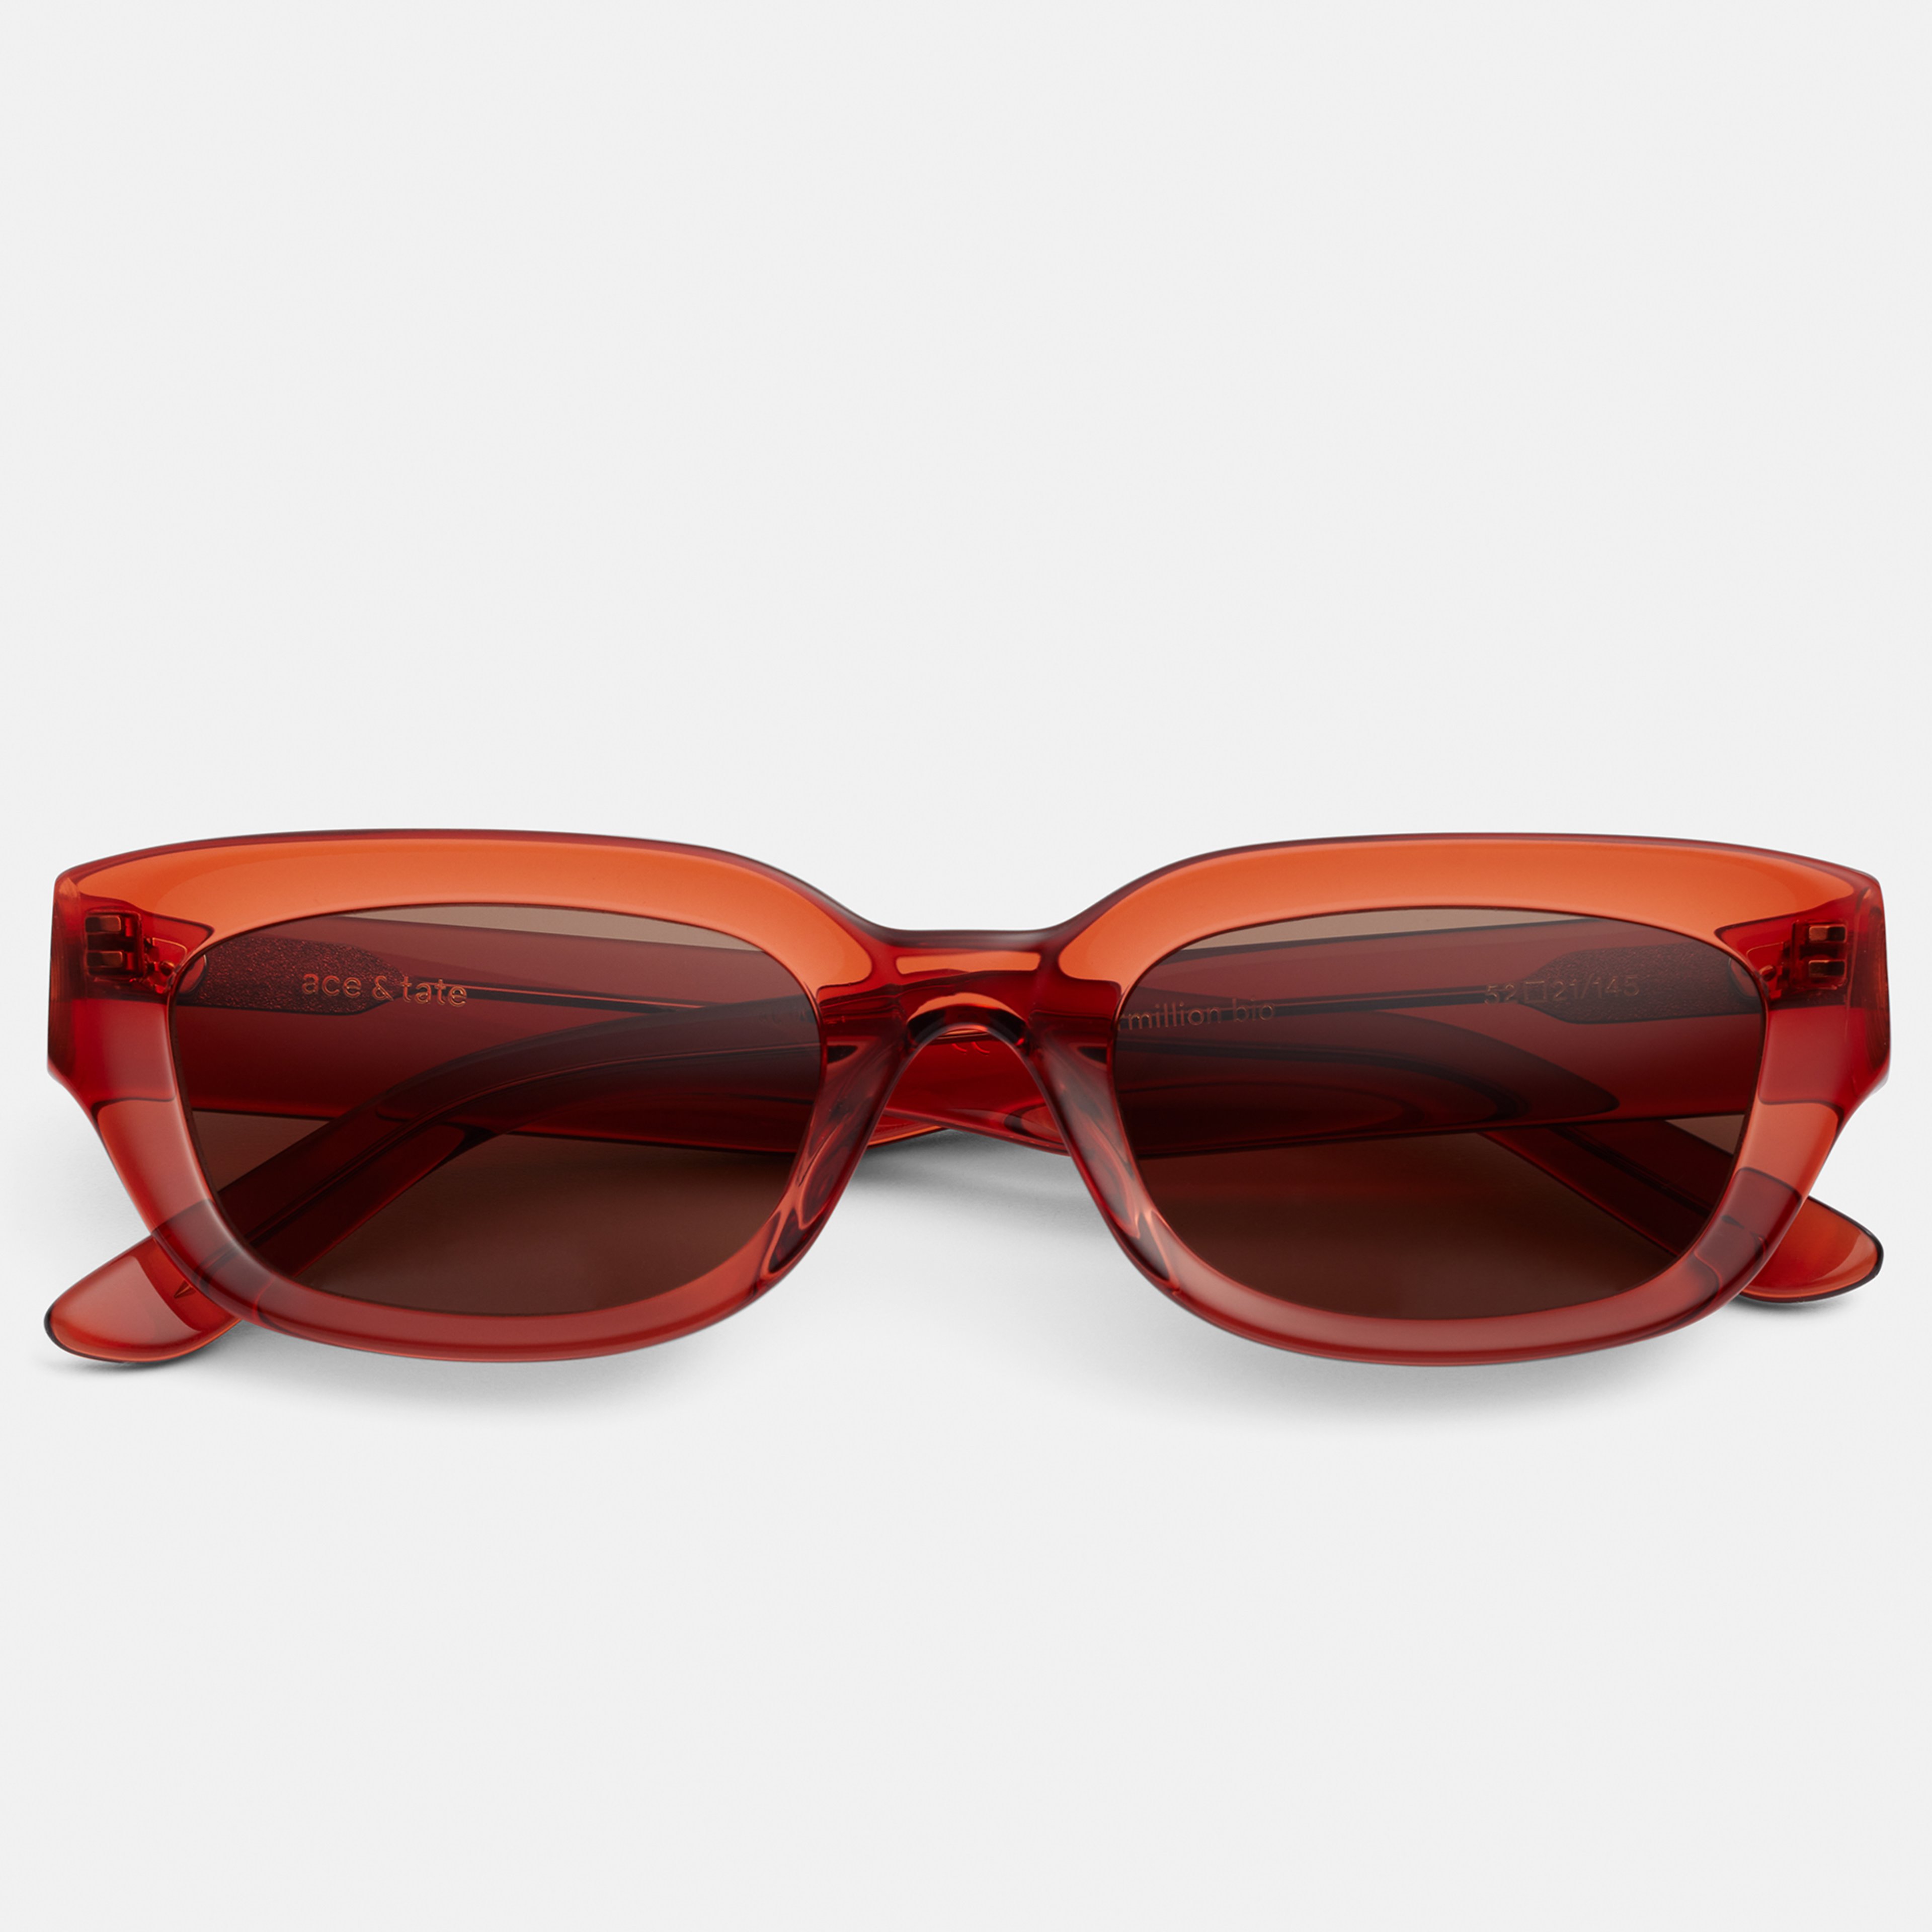 Ace & Tate Solaires | rectangulaire Renew bio-acétate in Rouge